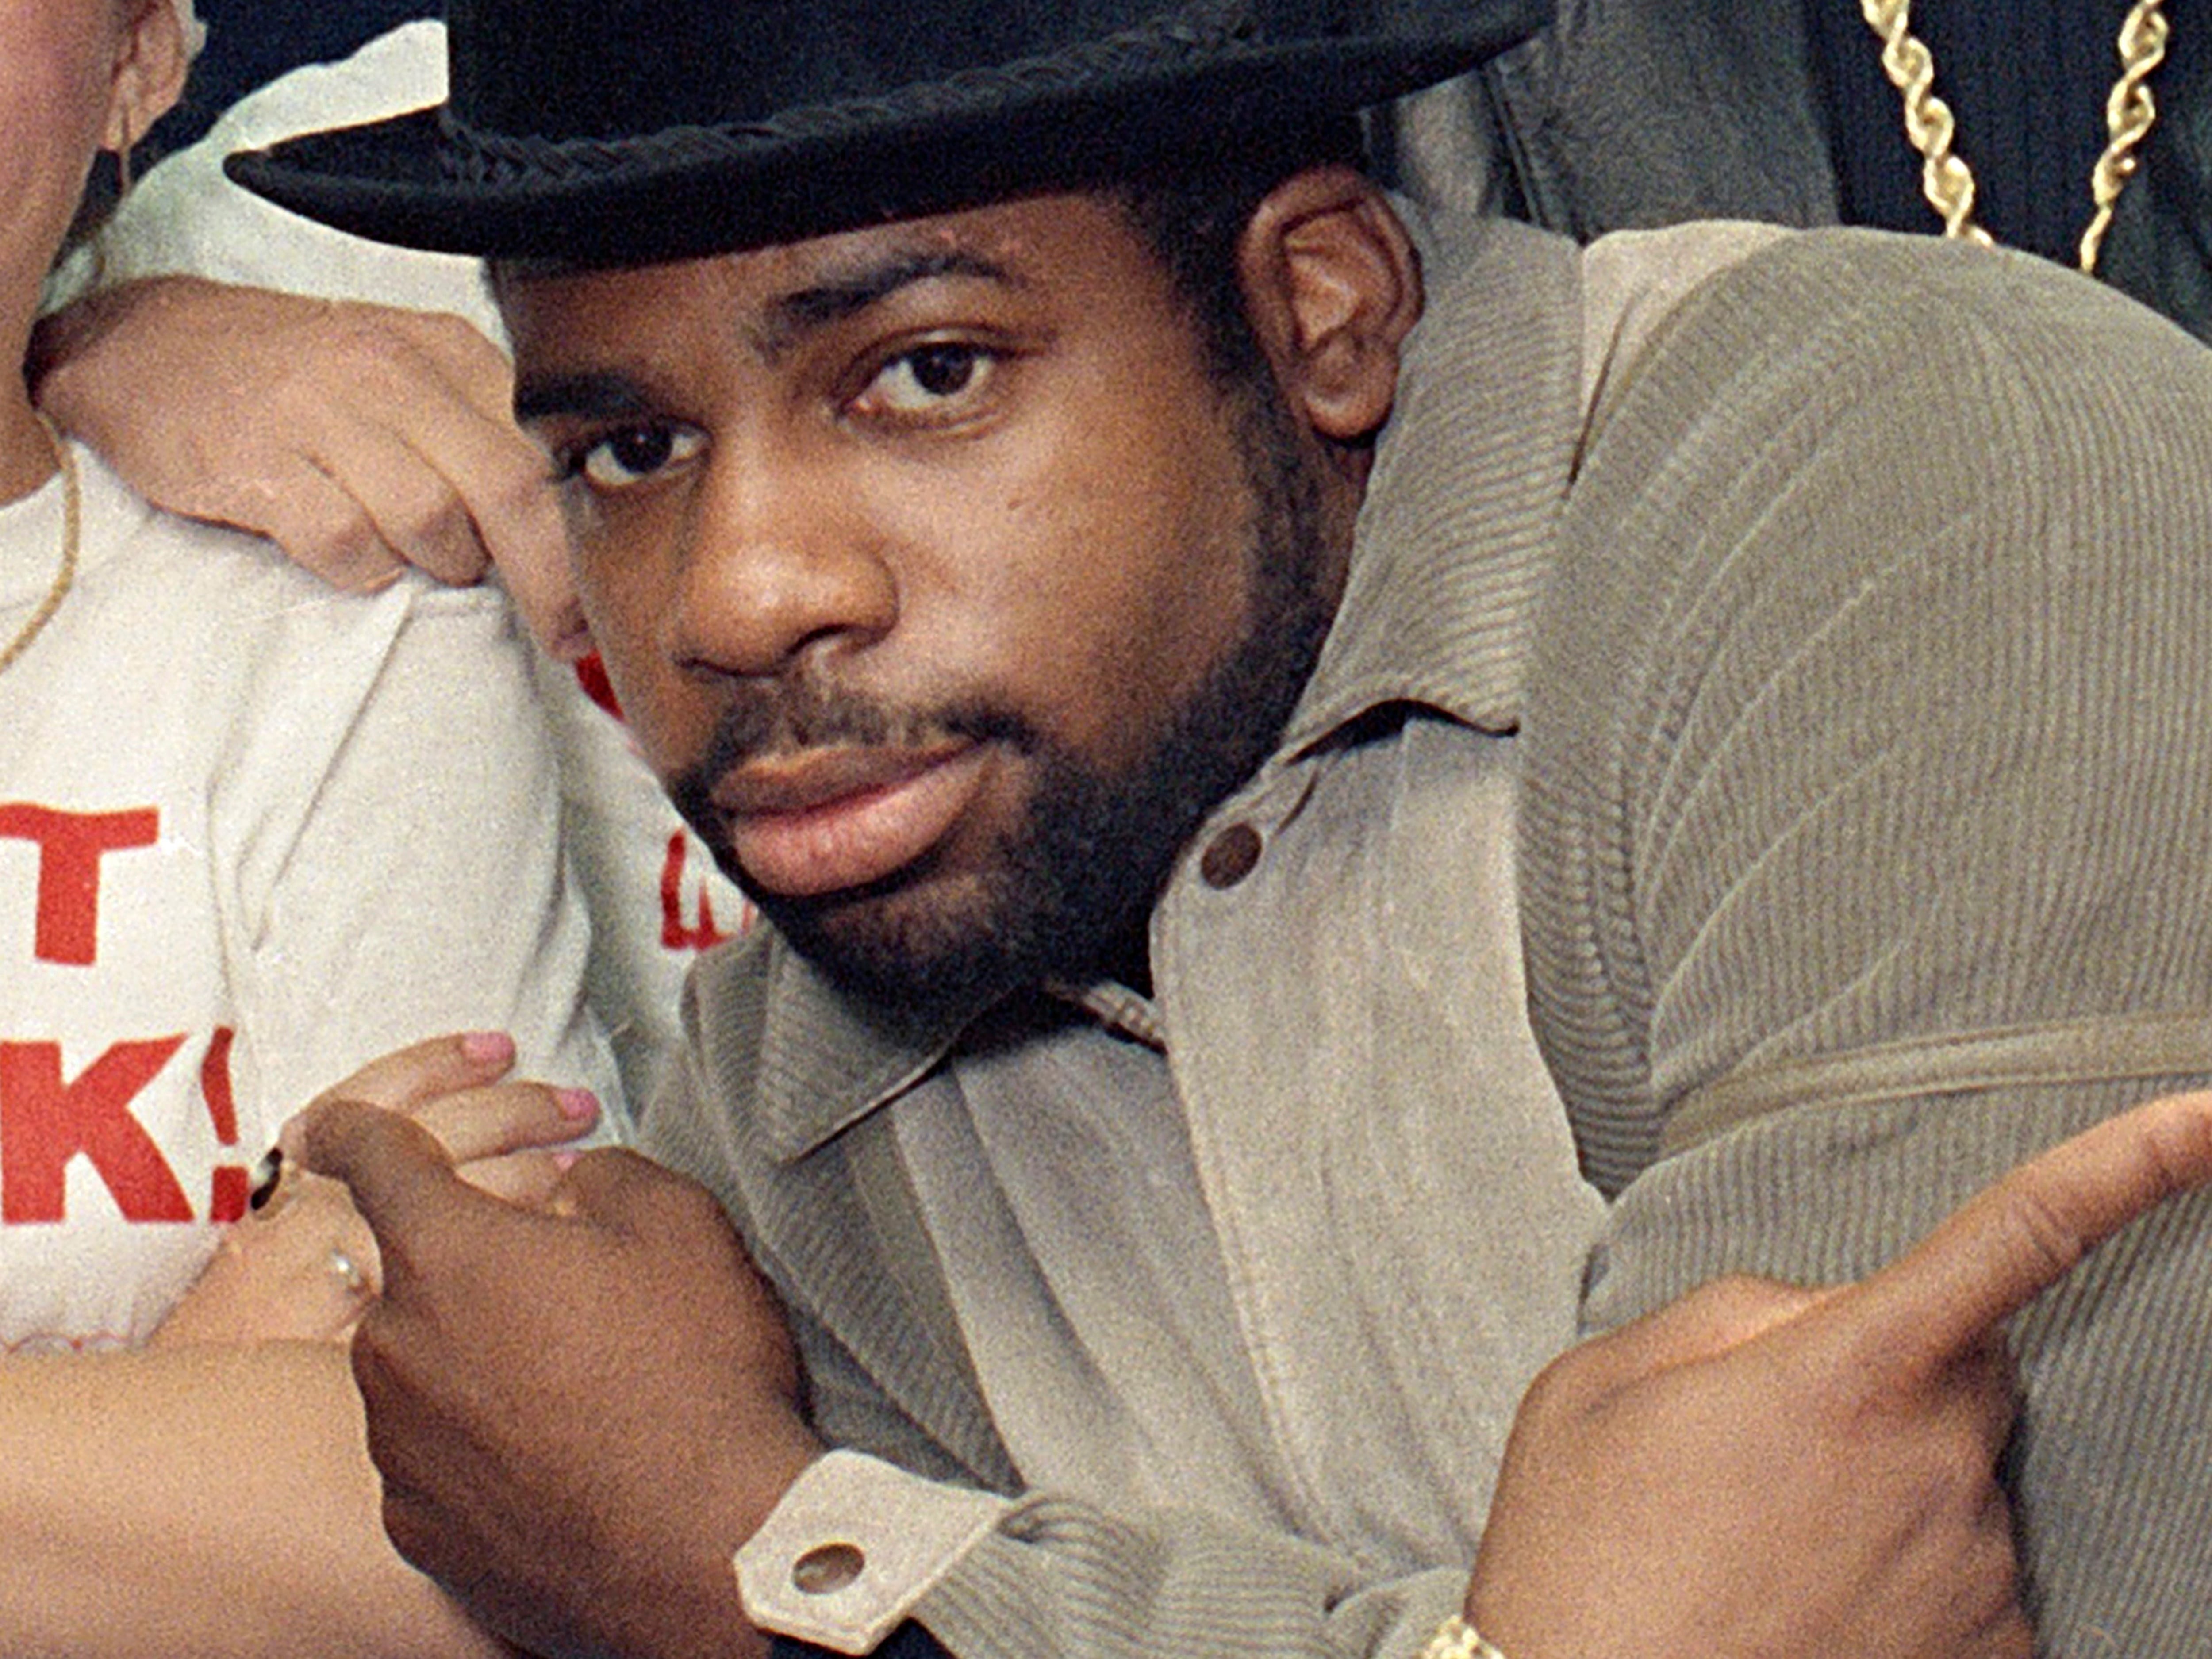 Judge rejects defence request for mistrial in Jam Master Jay murder case